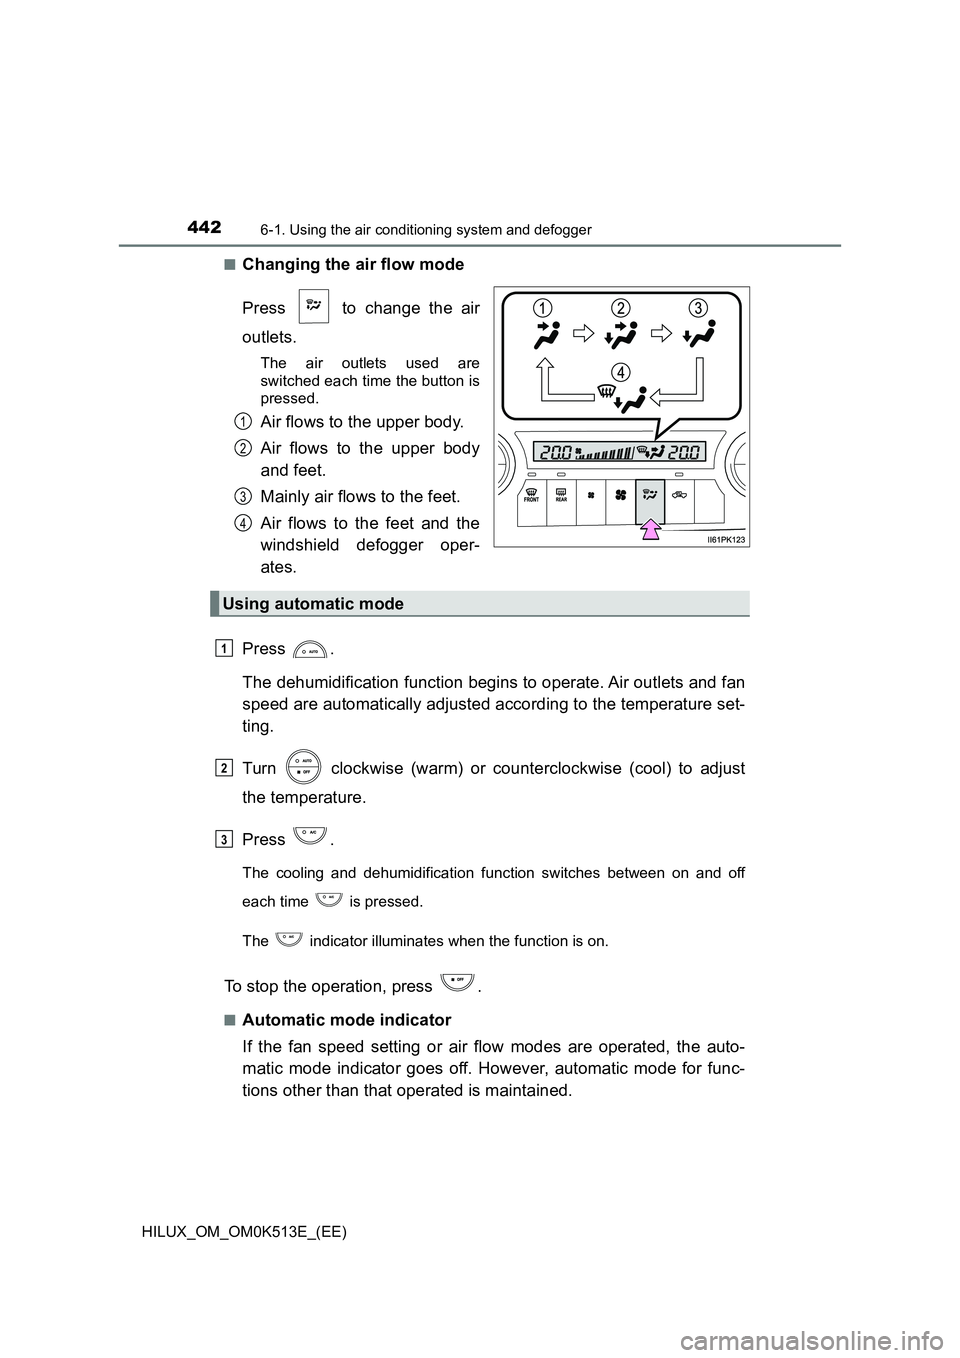 TOYOTA HILUX 2022  Owners Manual 4426-1. Using the air conditioning system and defogger
HILUX_OM_OM0K513E_(EE) 
�QChanging the air flow mode 
Press   to change the air 
outlets.
The air outlets used are 
switched each time the button